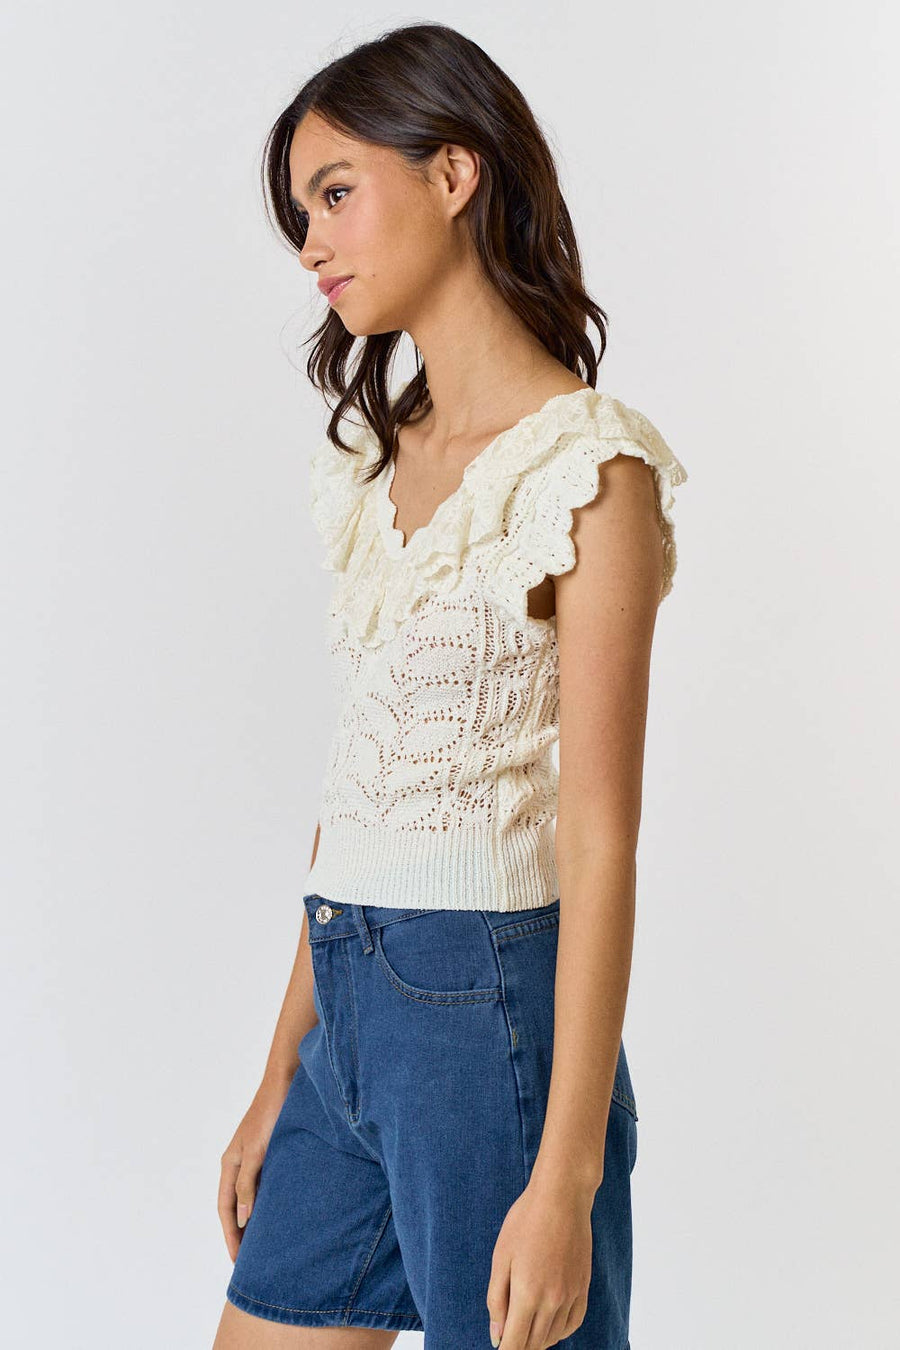 Crochet Top with Ruffled Neckline by Lalavon